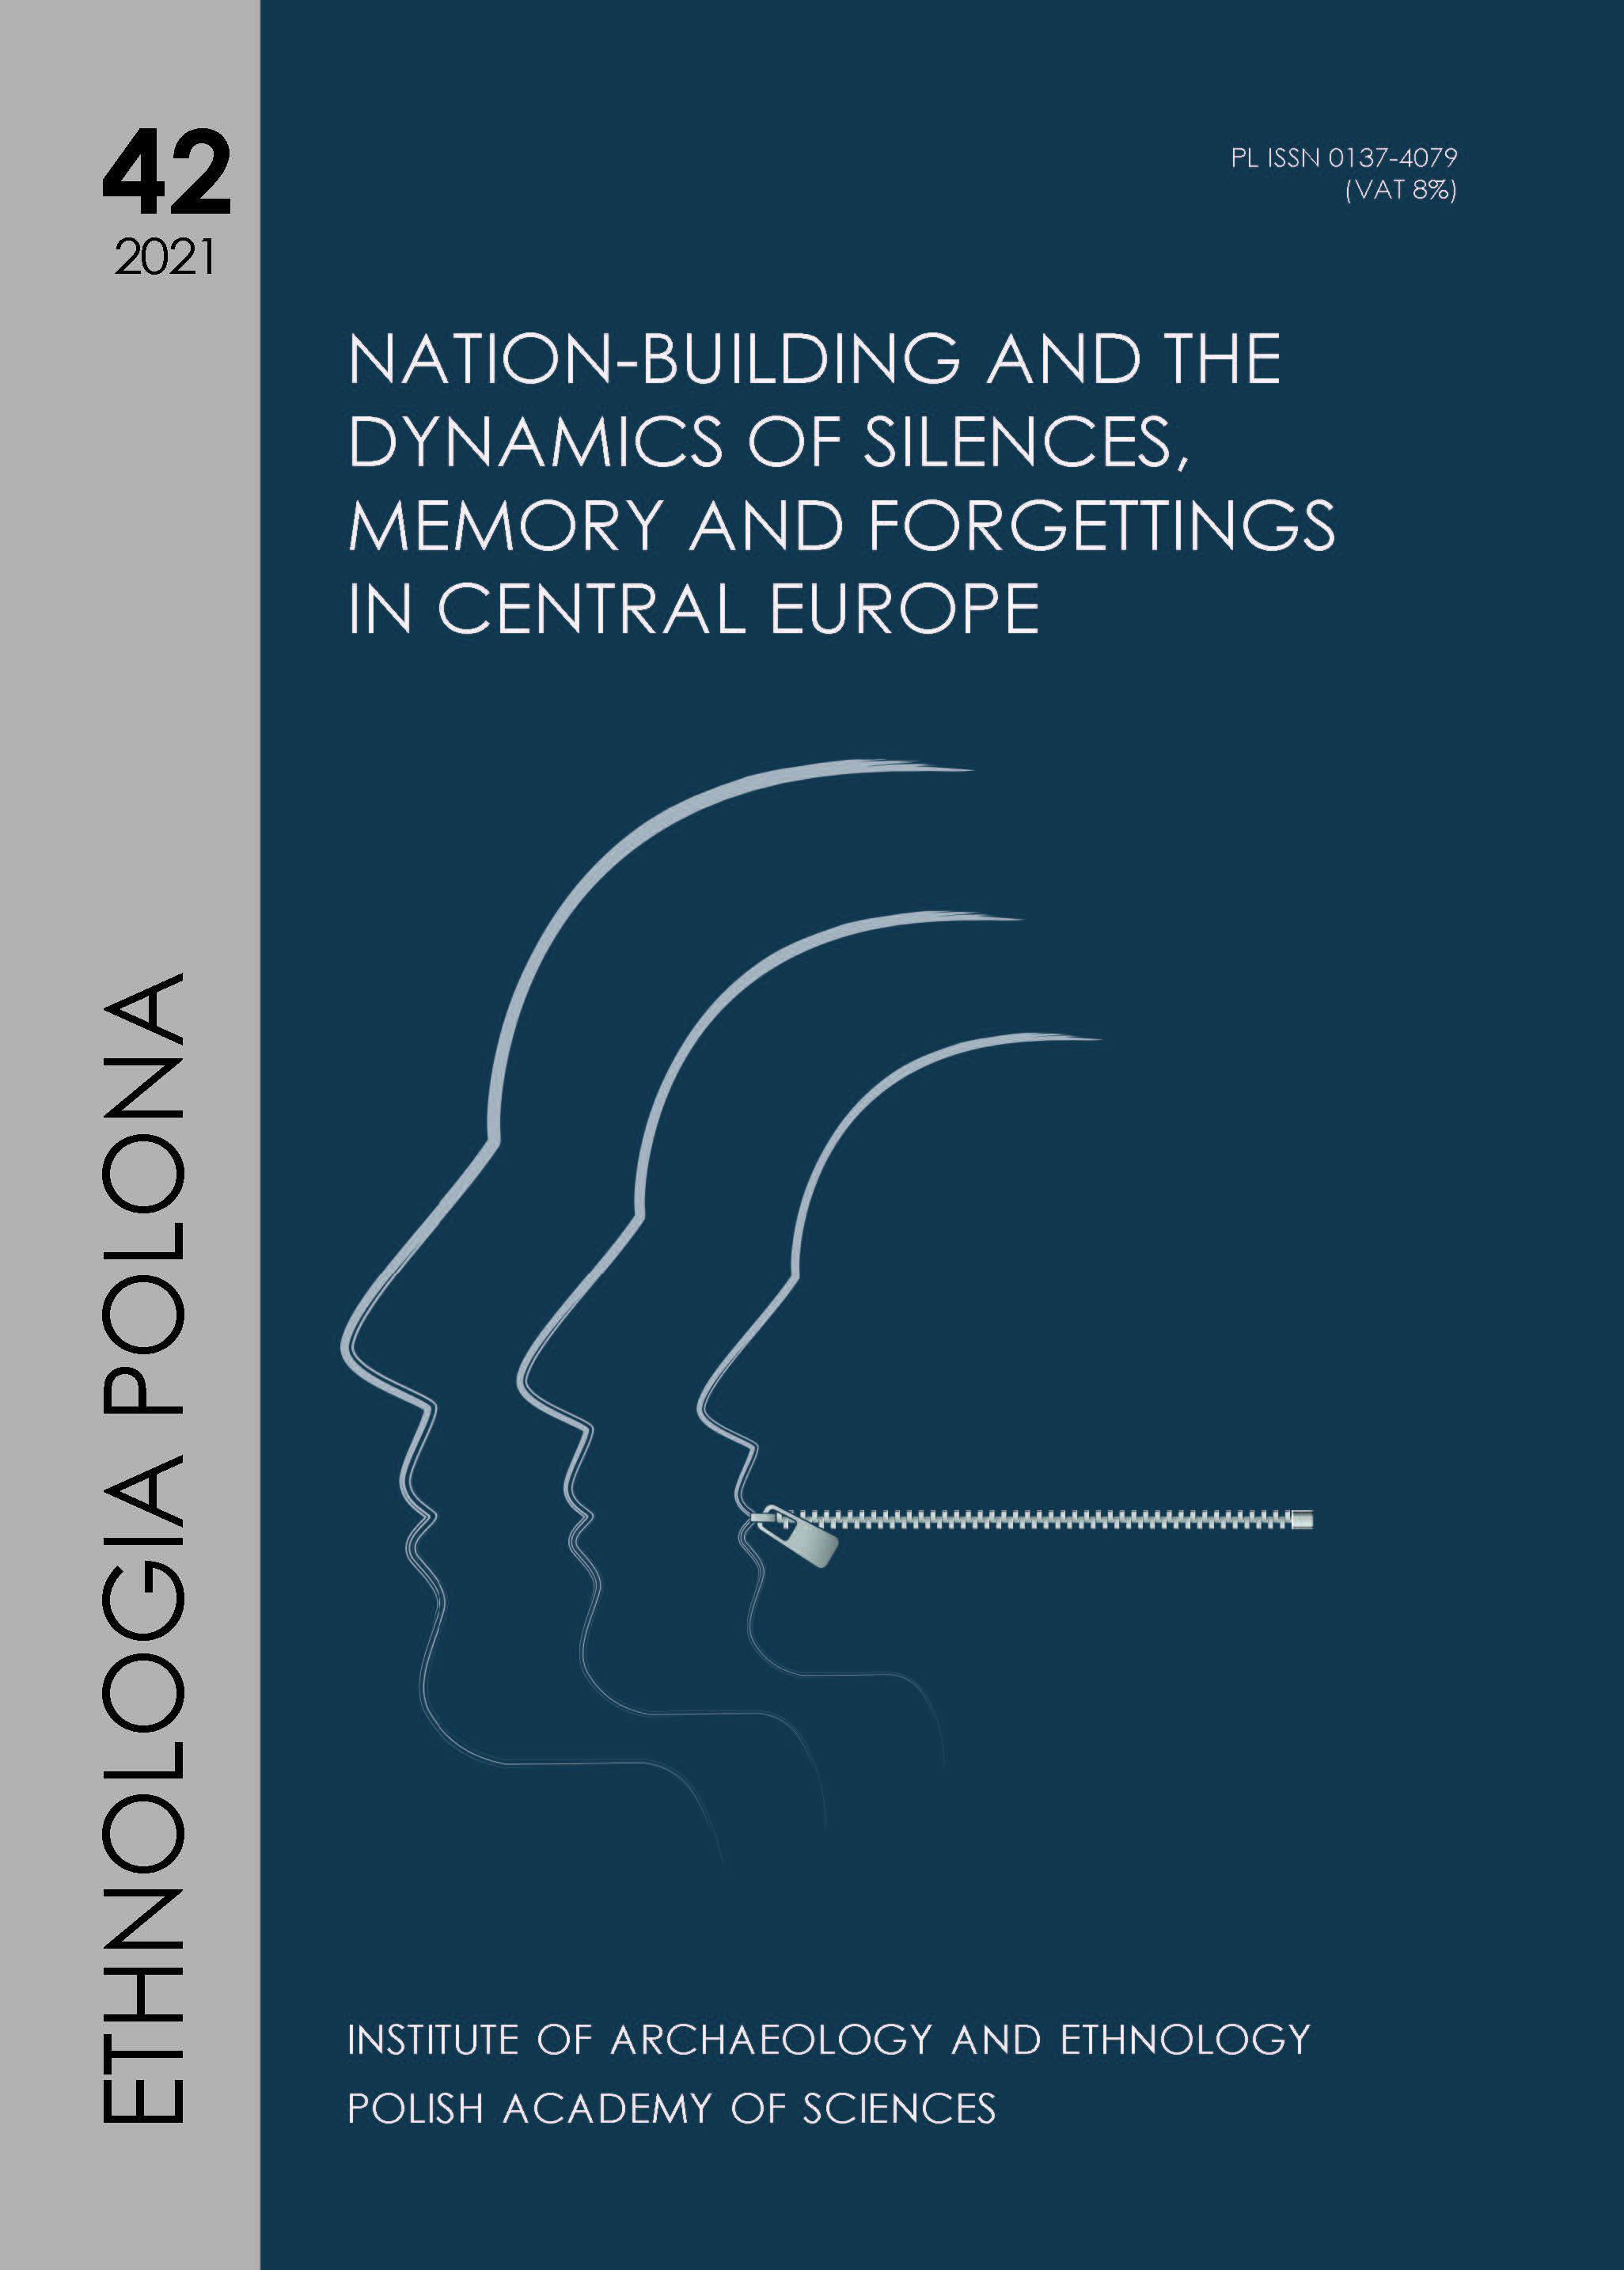 					View Vol. 42 (2021): Nation-Building and the Dynamics of Silences, Memory and Forgettings in Central Europe
				